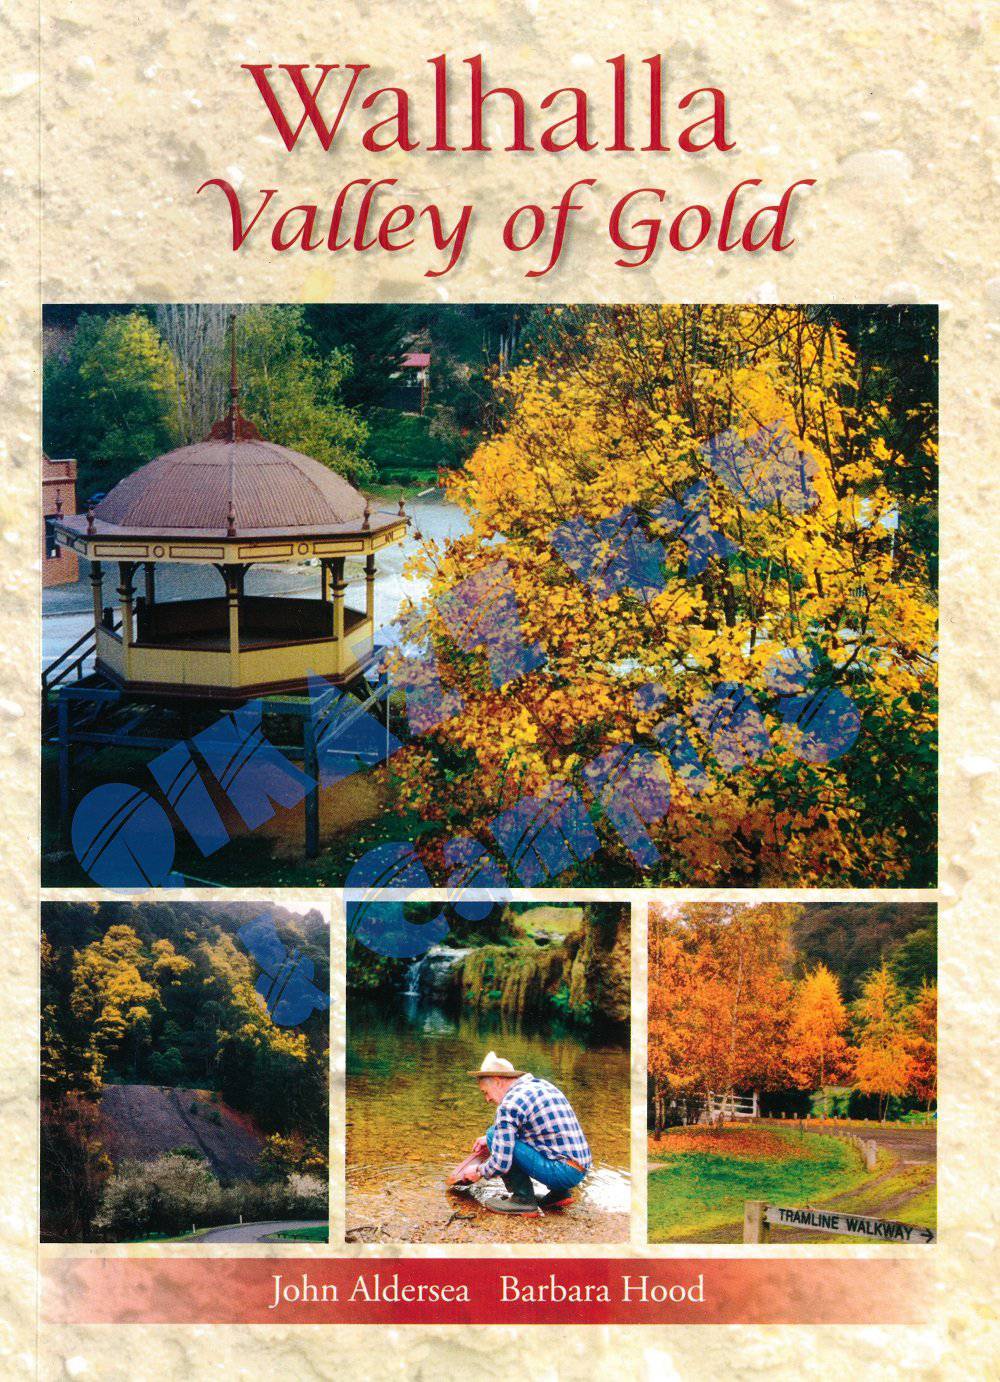 Walhalla - Valley of Gold by John Aldersea and Barb Hood | Adventurer Maps